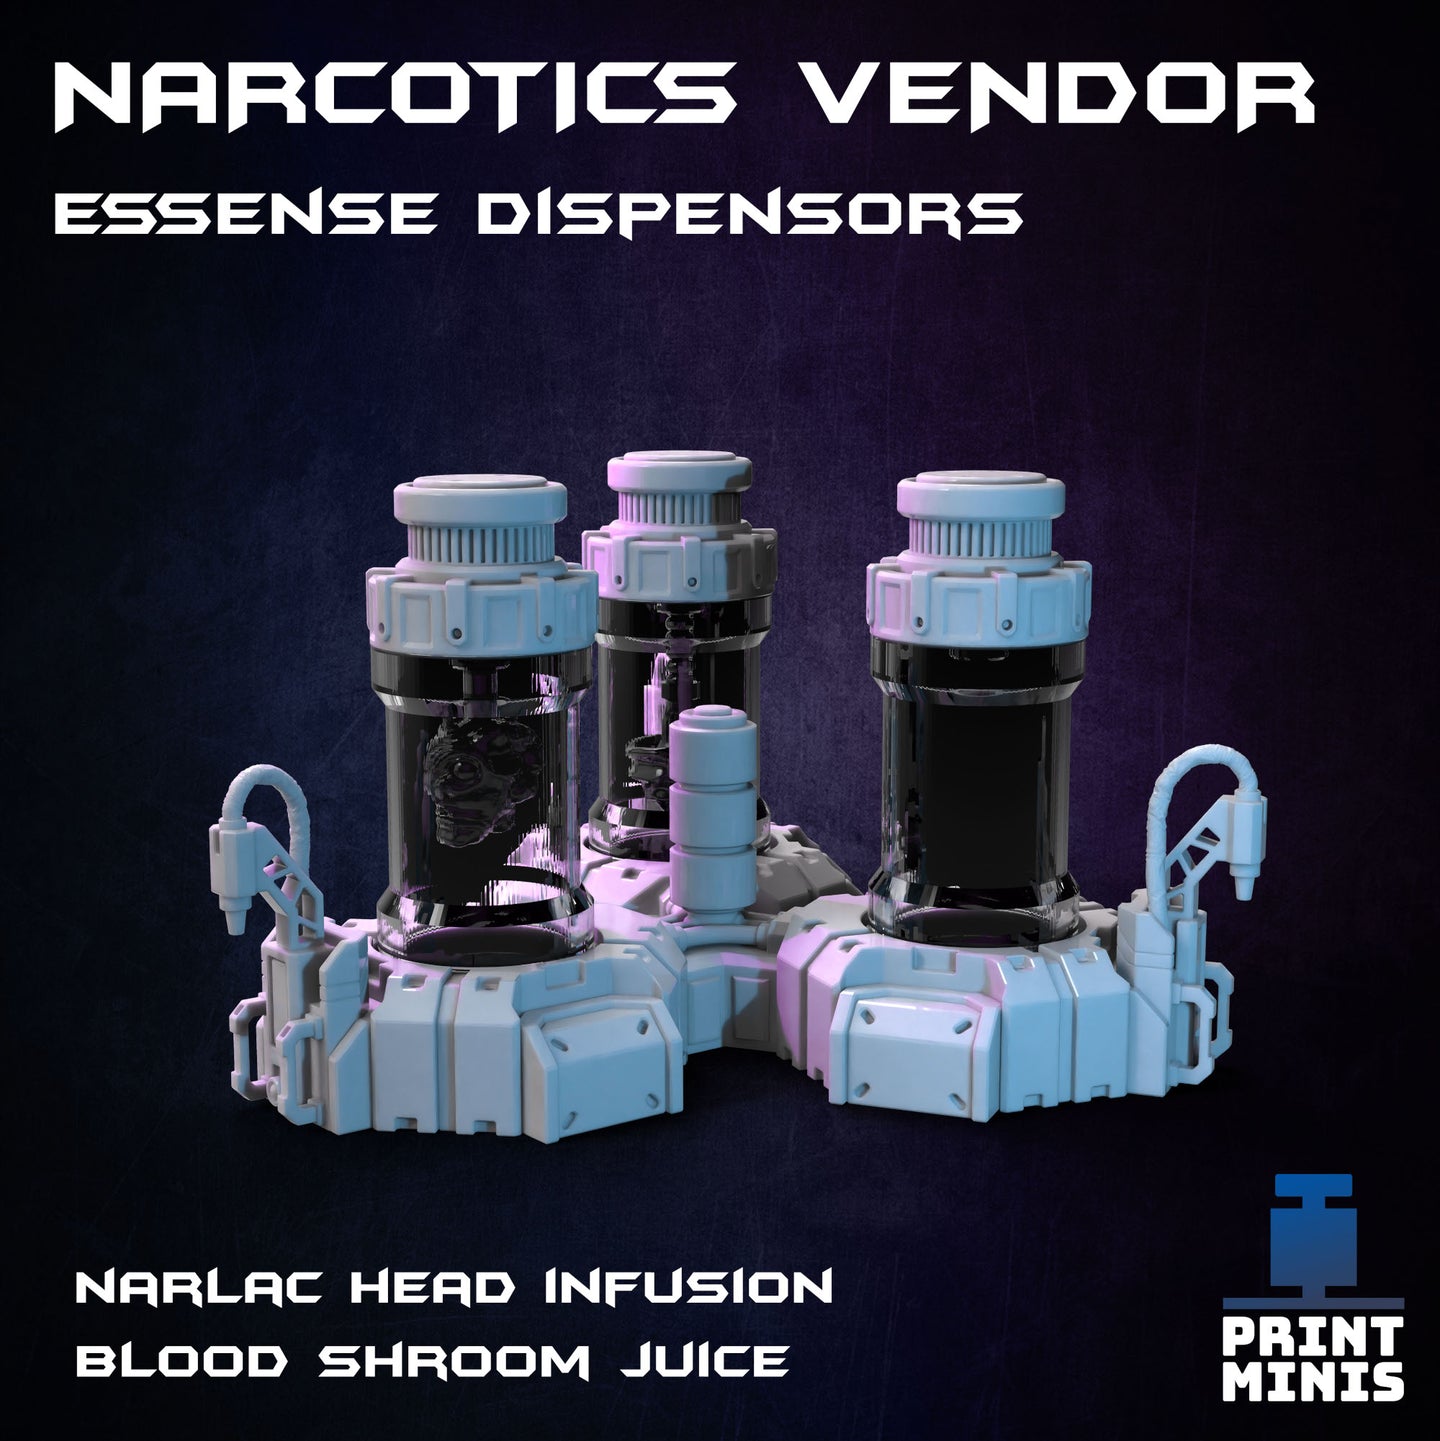 Narcotic Store Essence Dispensers - Night Market - Print Minis - Wargaming D&D DnD